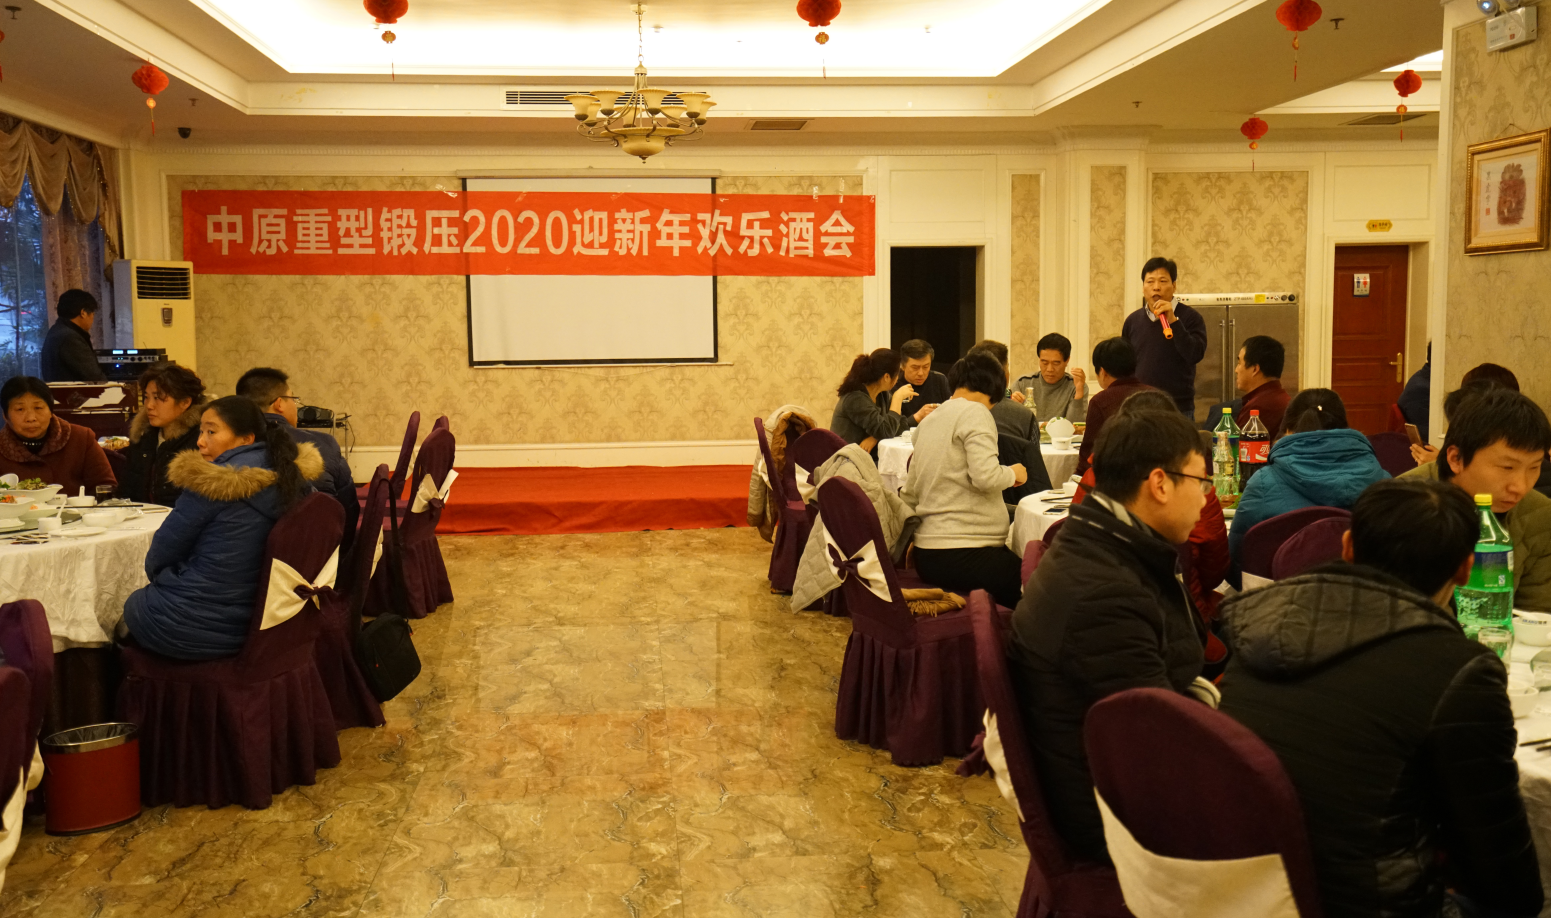 On December 31, 2020, the New Year Party will be held grandly! This is the 16th annual meeting held since the establishment of the company. 